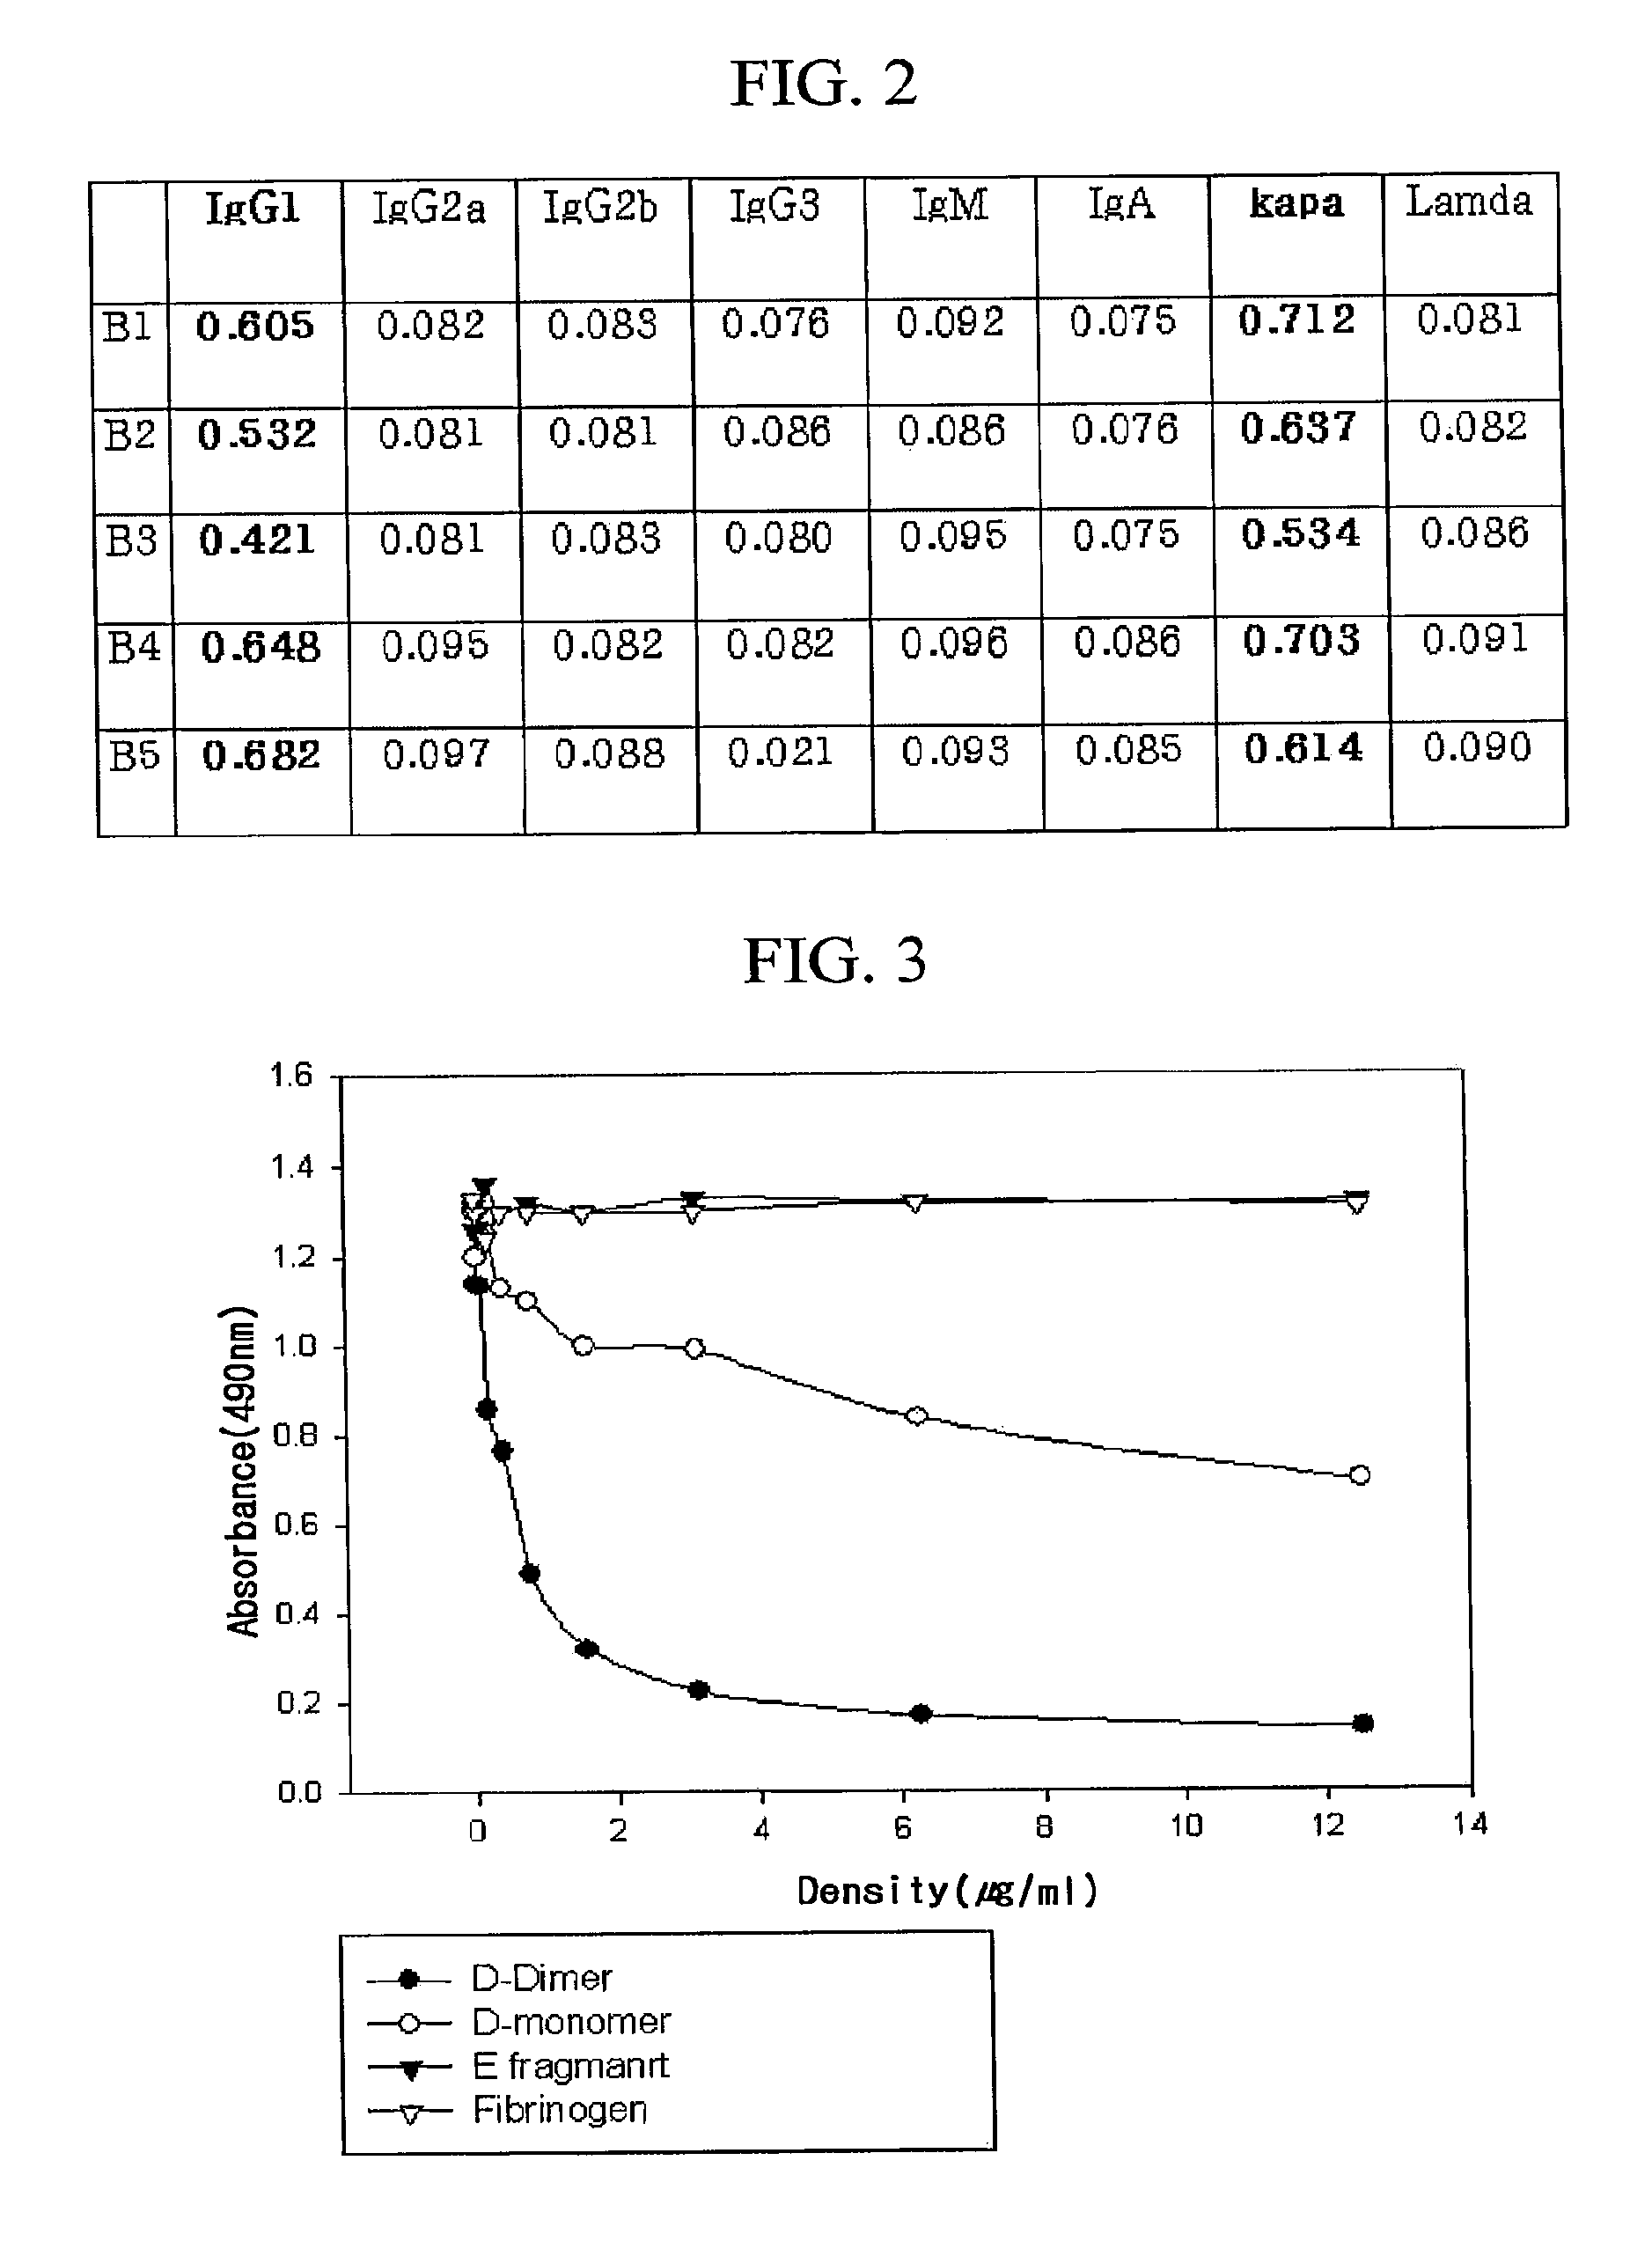 Monoclonal antibody against D-dimer and diagnosis agent for detecting D-dimer, crosslinked fibrin and its derivatives containing D-dimer by using the antibody